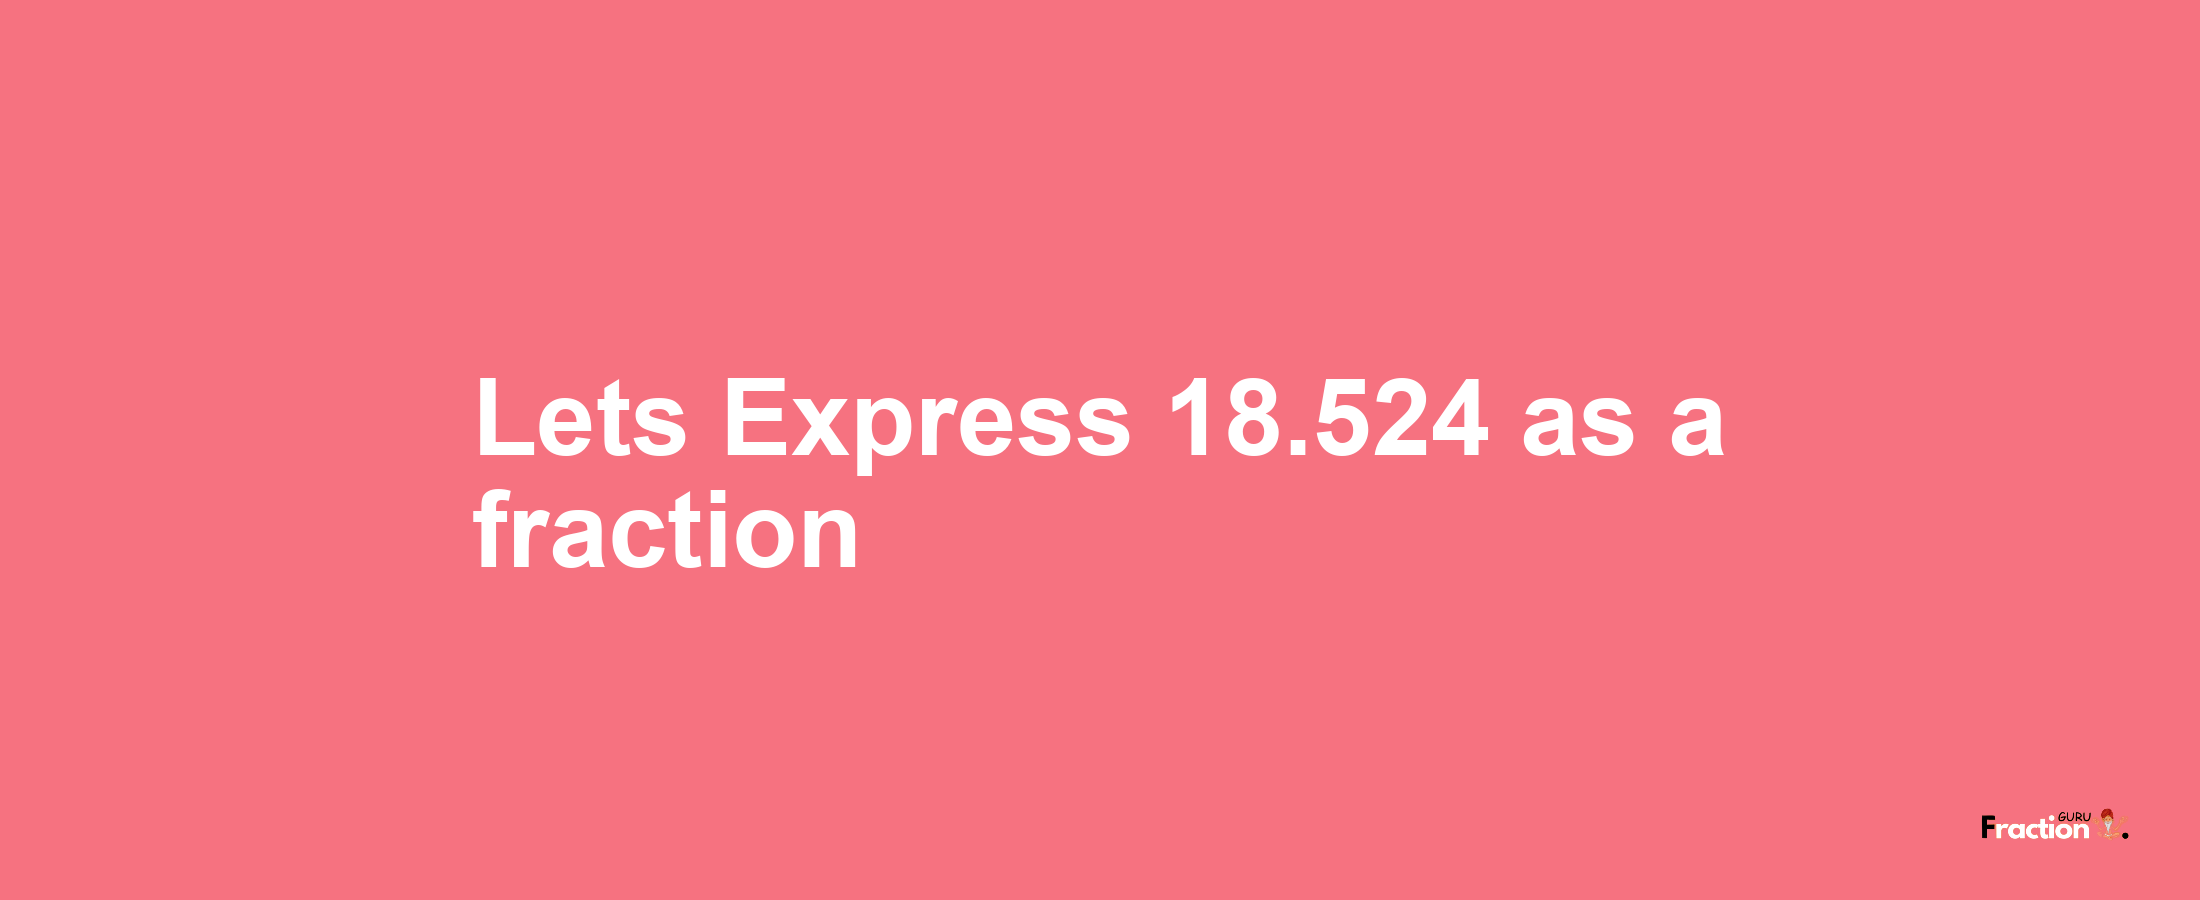 Lets Express 18.524 as afraction